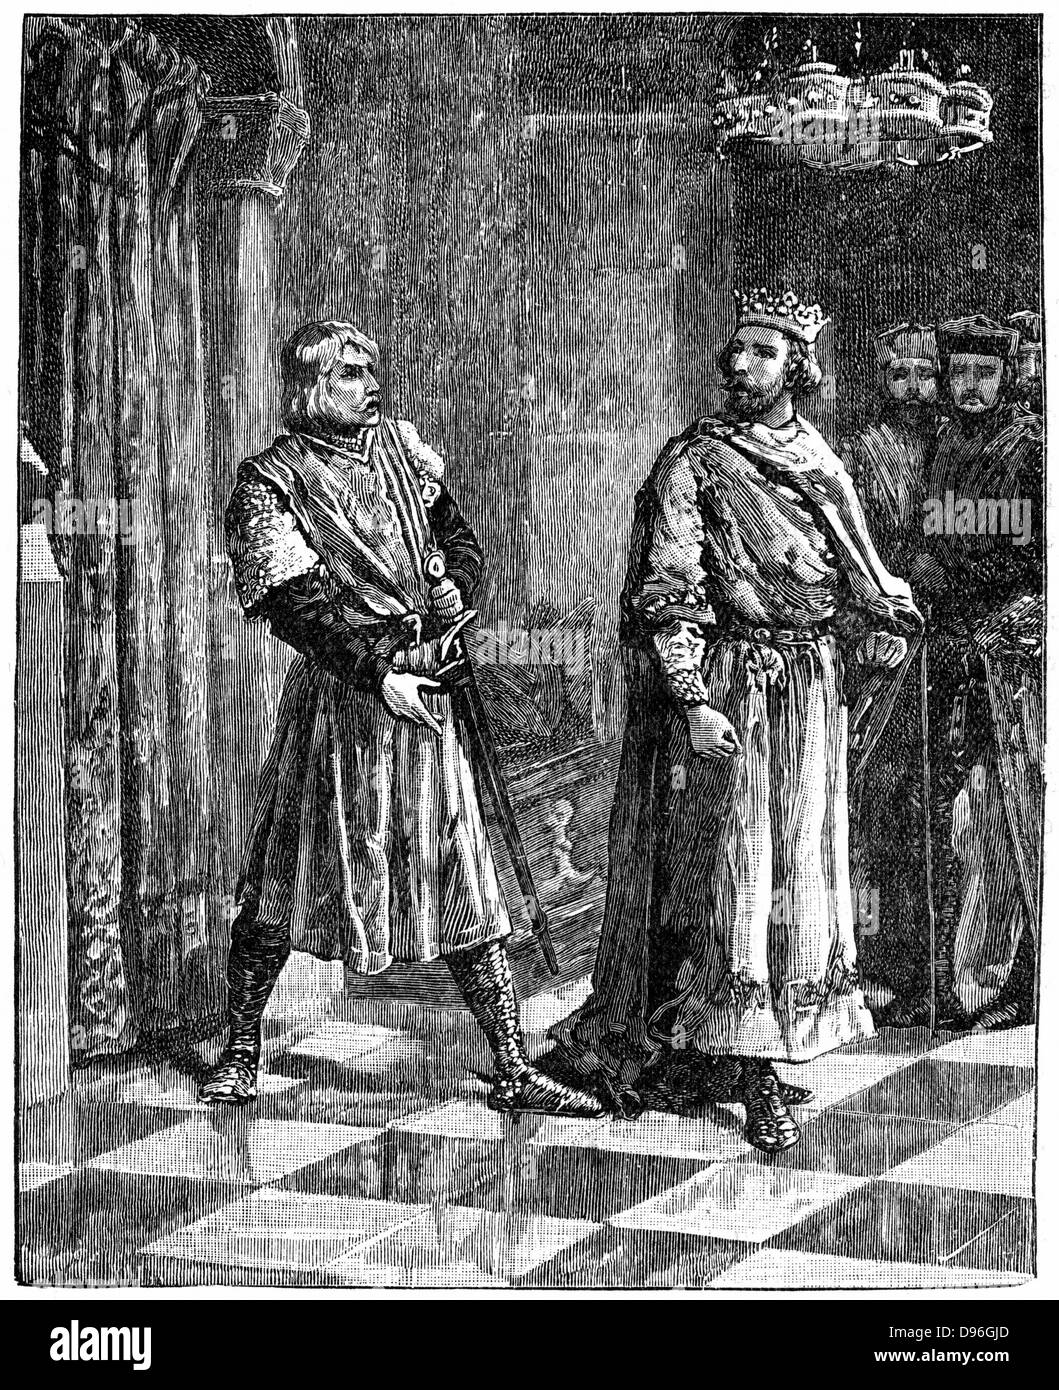 Simon de Montfort, Earl of Leicester (c1208-1265).  De Montfort, English statesman and soldier, quarrelling with Henry III (1207-1272) in 1257. Wood engraving c1880. Stock Photo